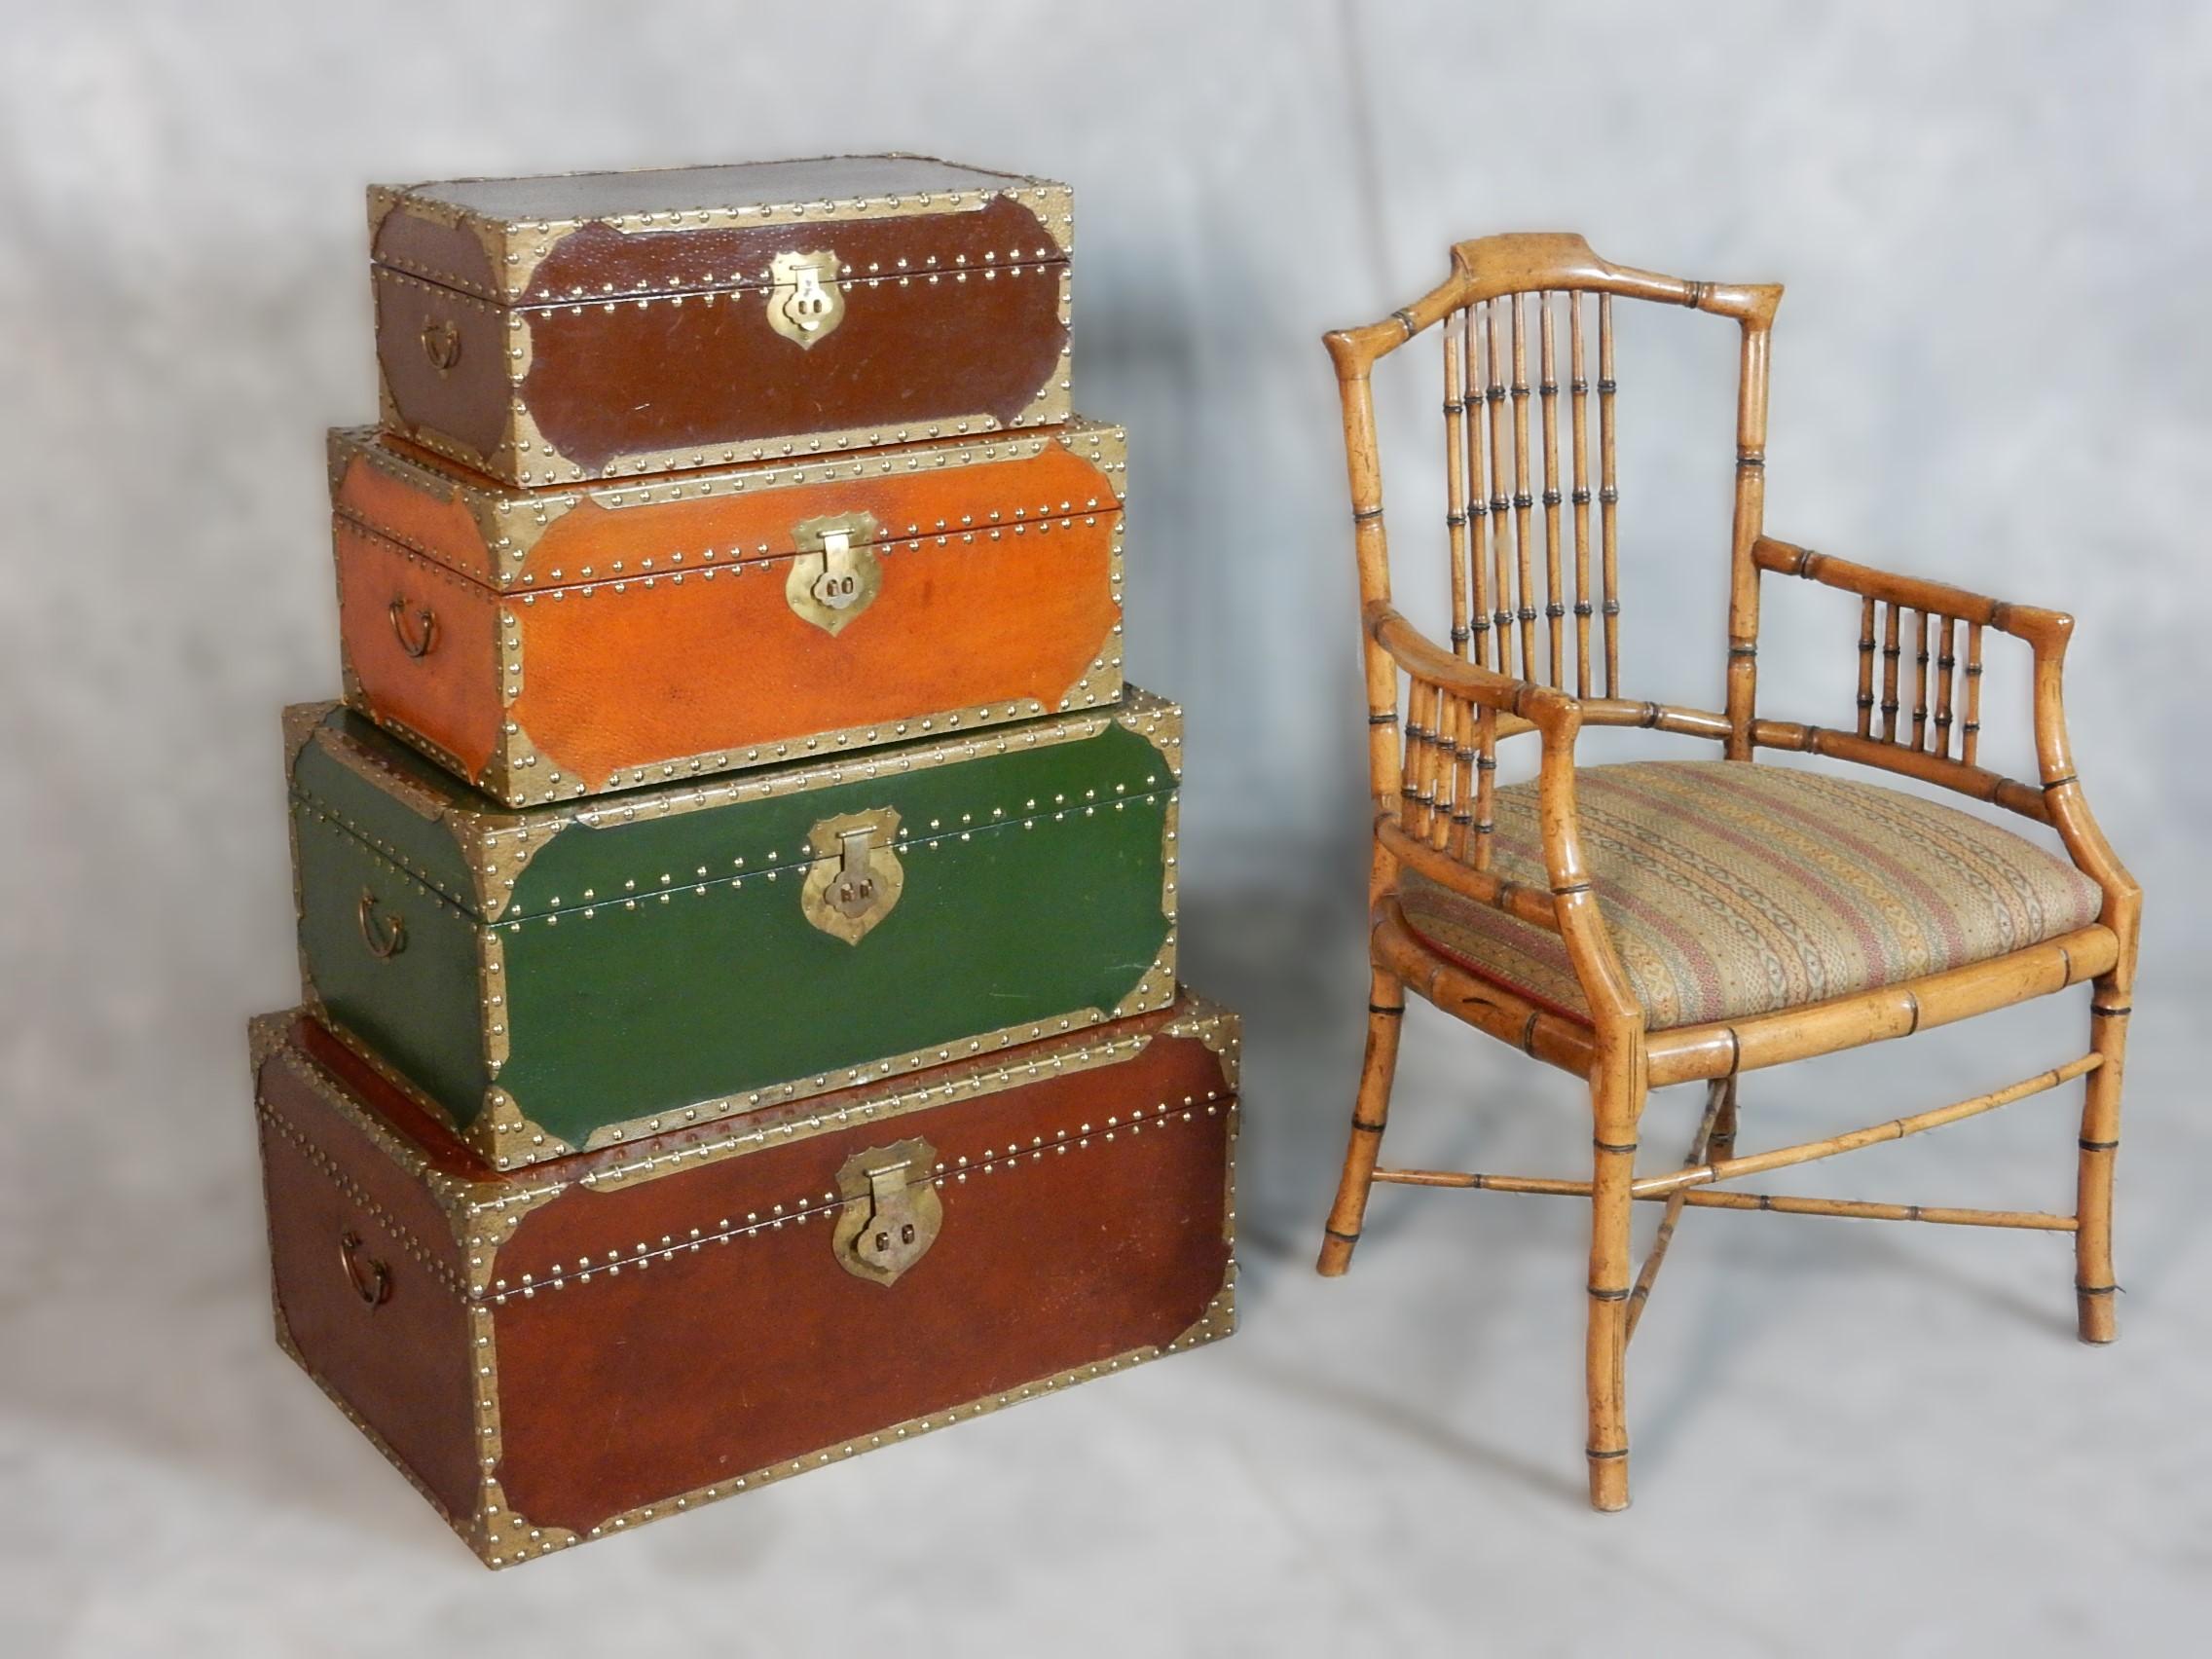 Circa 1980's brass nail head nesting blanket storage trunks. 
Each is beautifully hand crafted in wood with felt lining. 
Not marked by origin. Most likely India or Tiwan.
They all show very well with just a few scuffs/scratches on tops from past